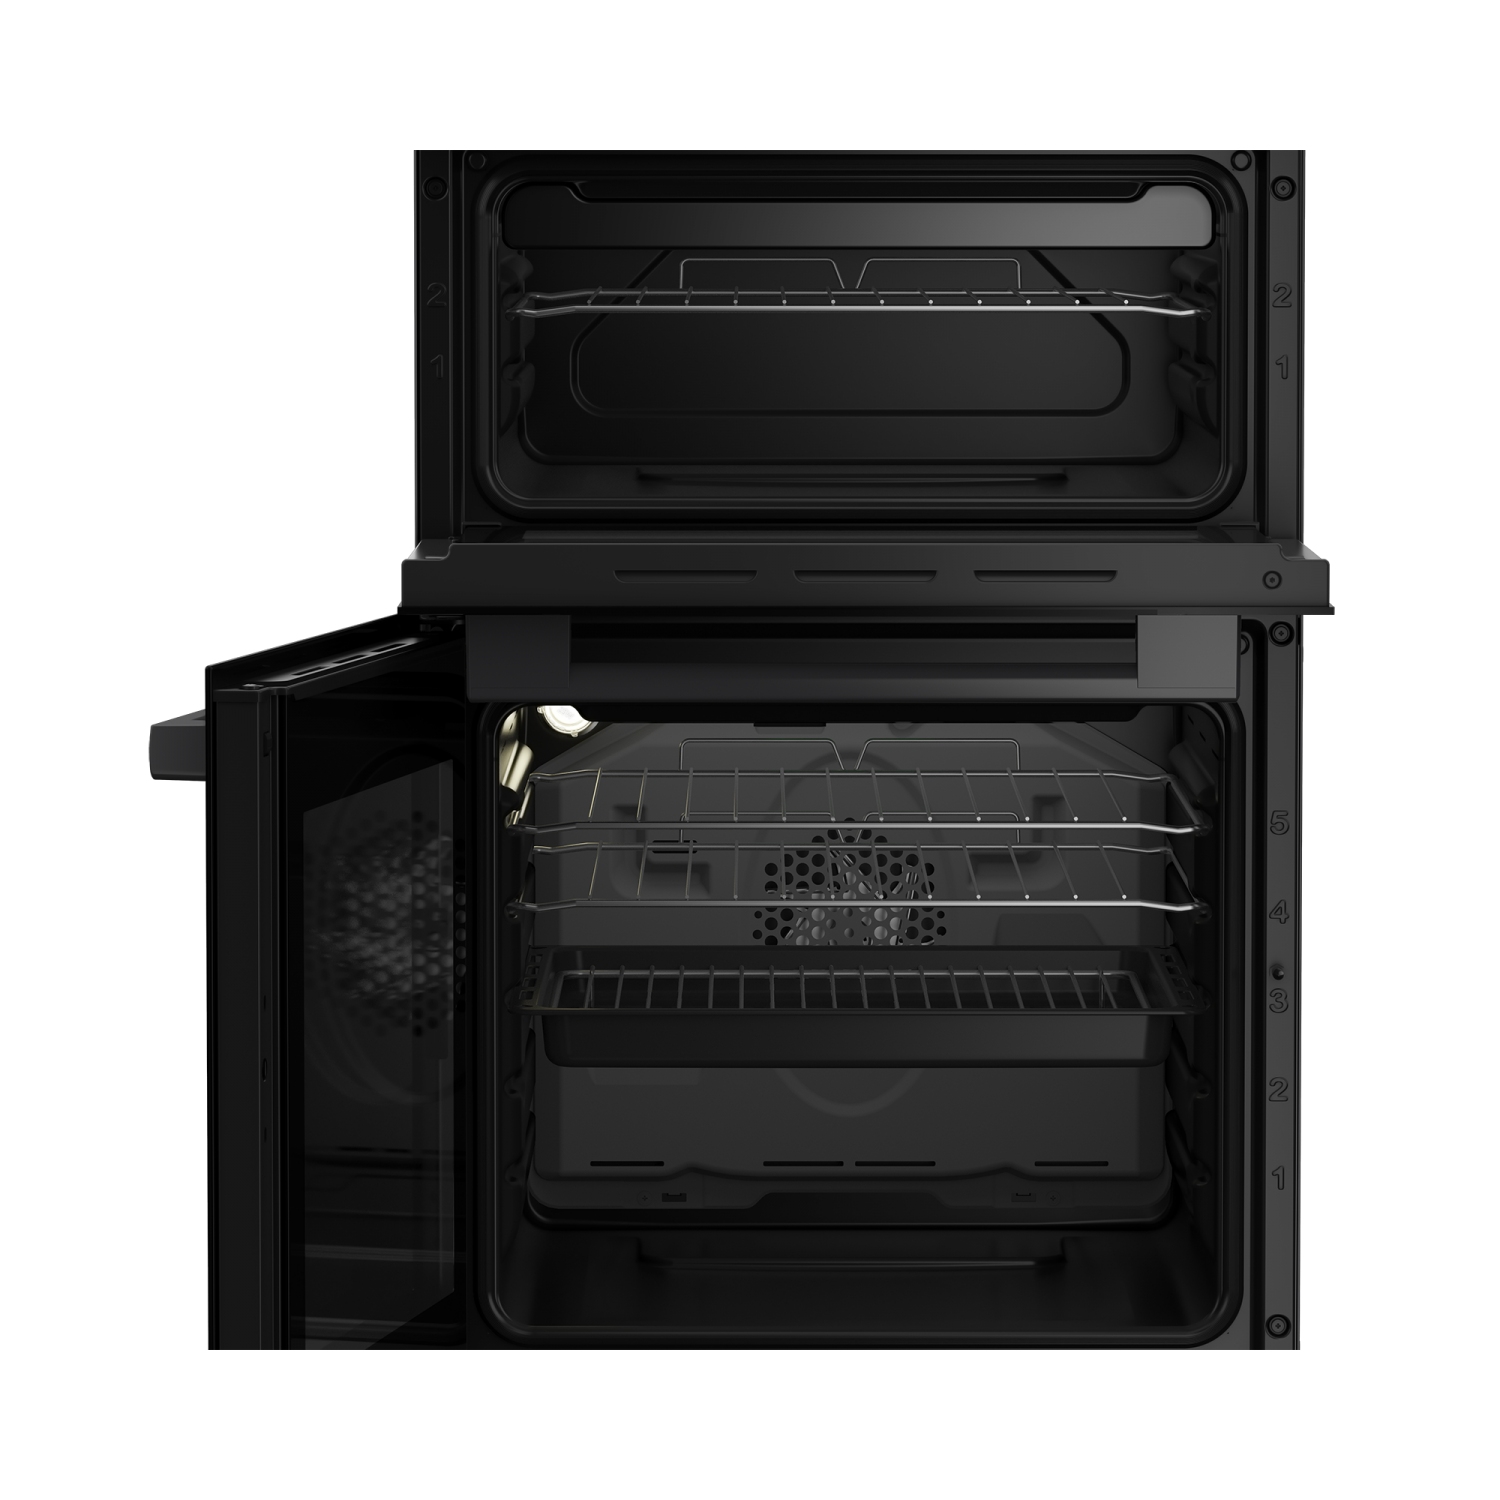 Blomberg HKS951N 50cm Double Oven Electric Cooker with Ceramic Hob - Anthracite - 2